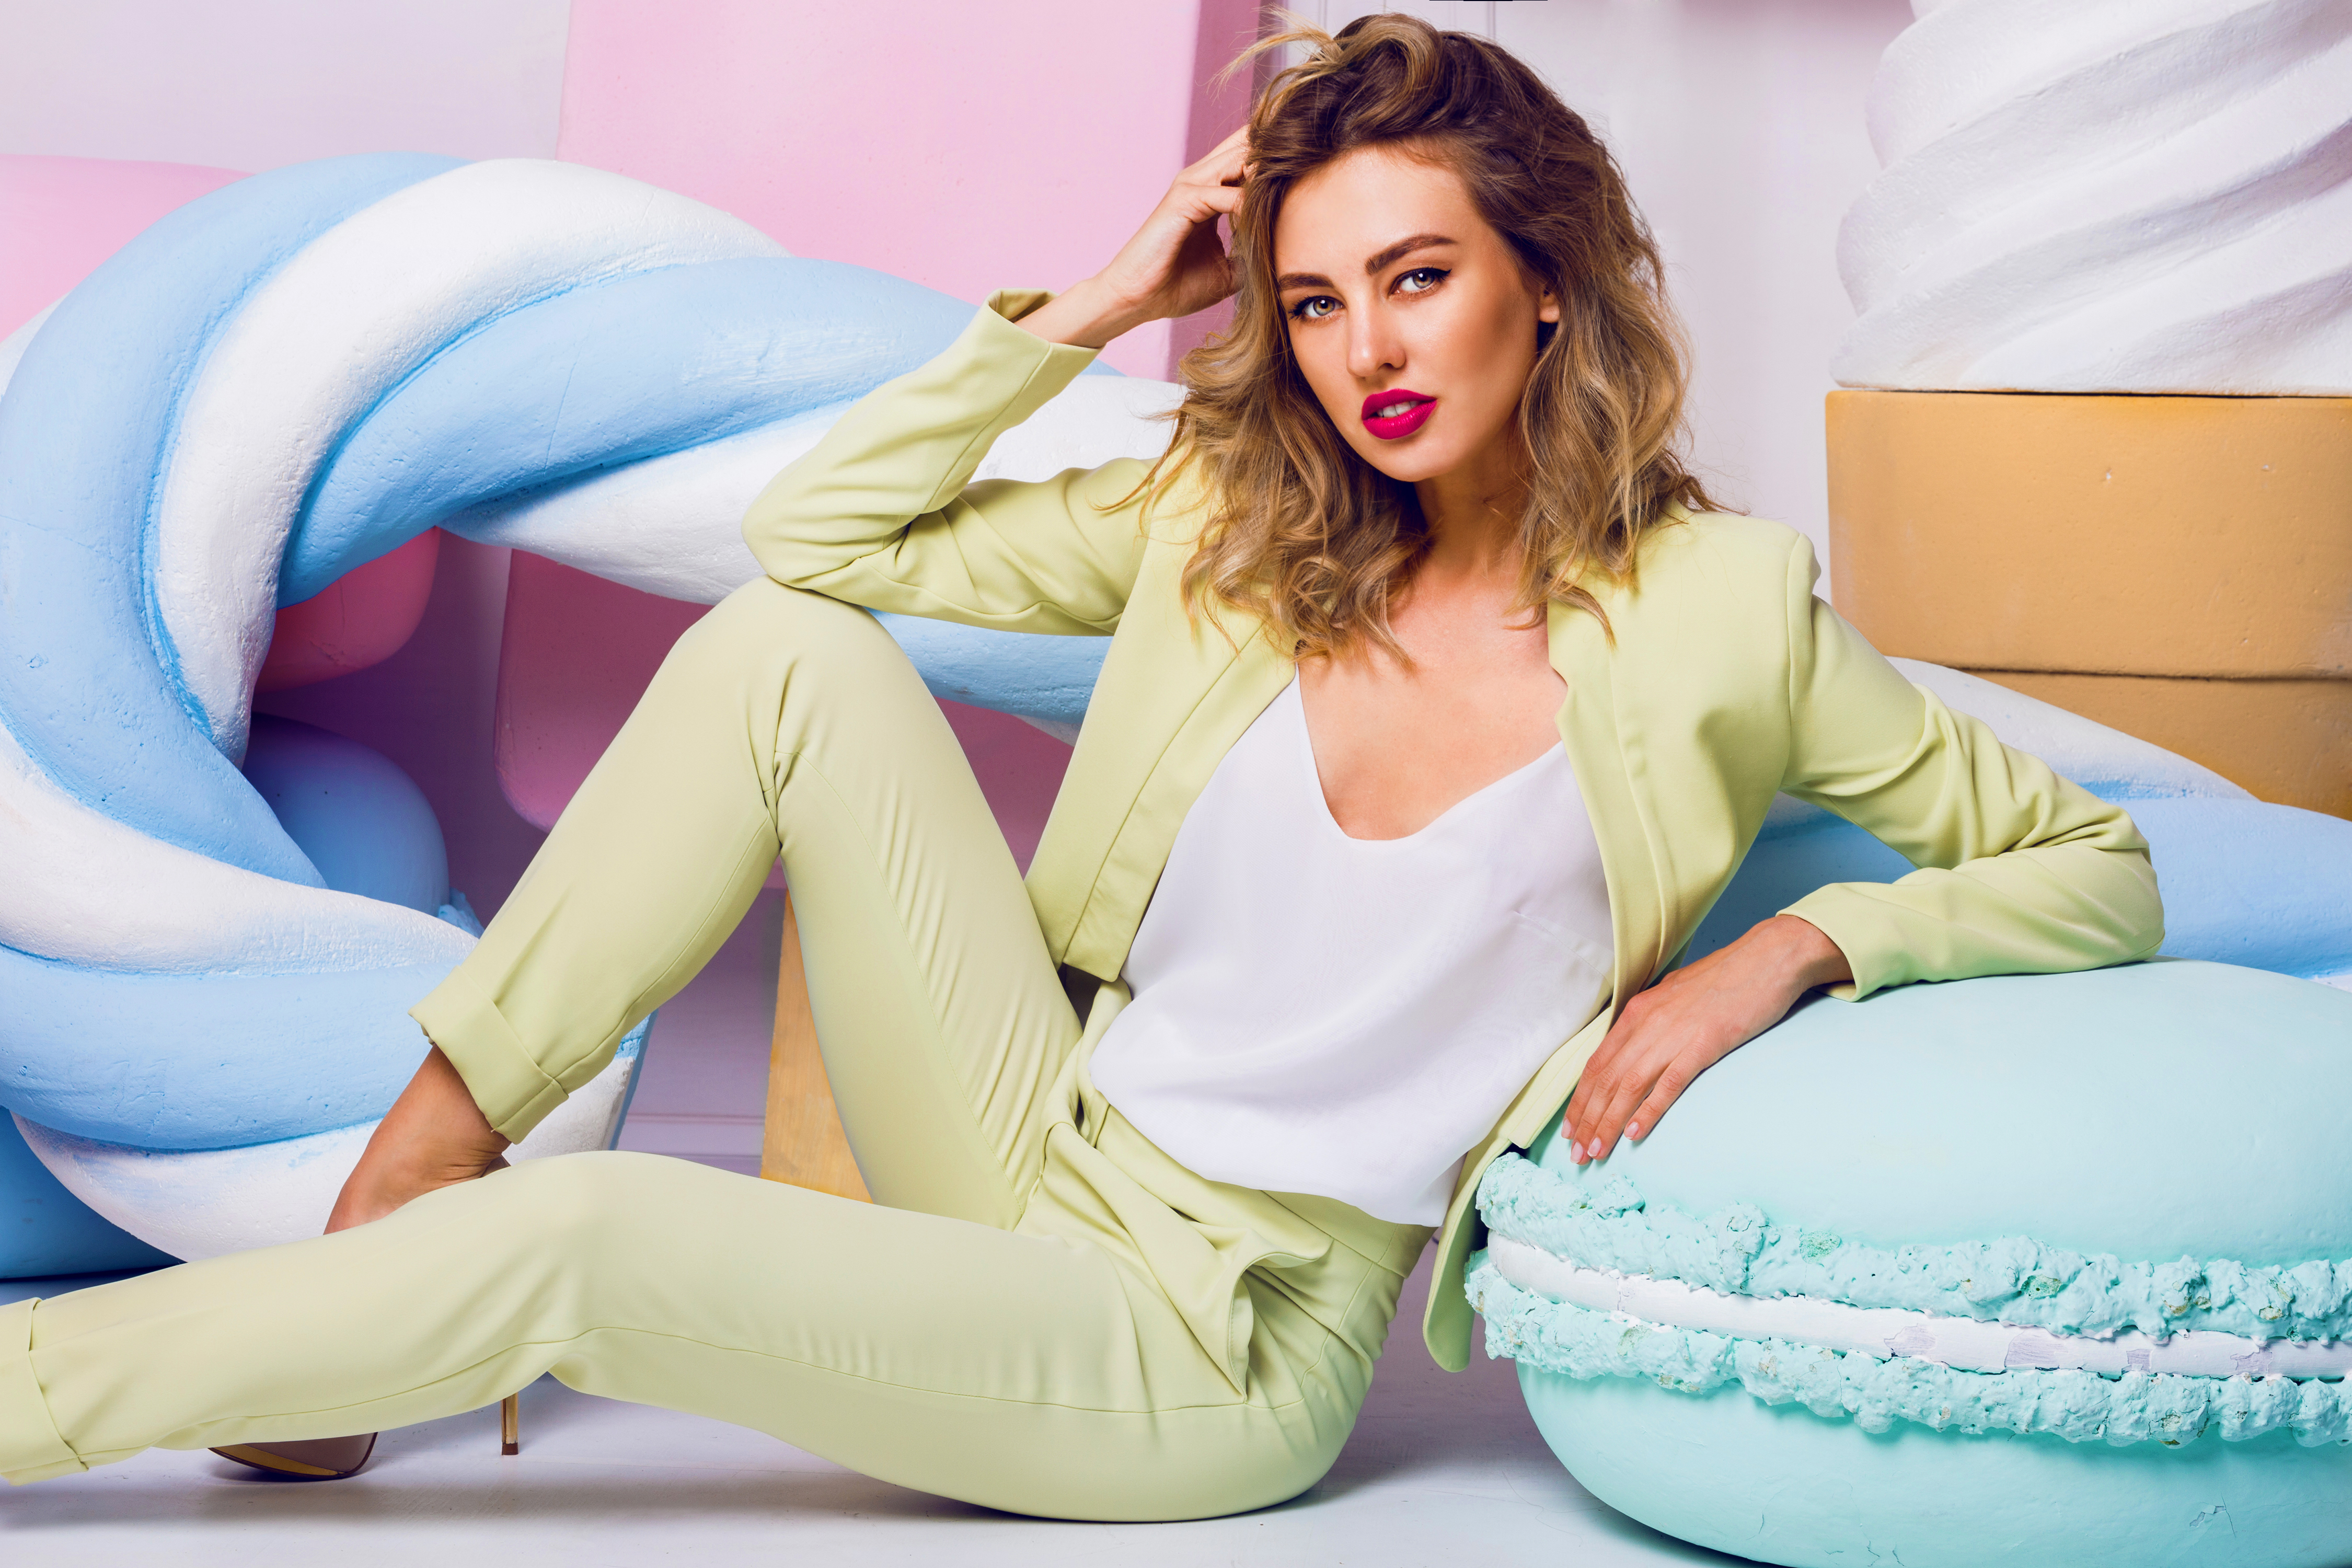 blogModacad-cores-ver-o-20-21-fashion-photo-of-sexy-beautiful-woman-with-blond-curly-hairstyle-wearing-elegant-costume-and-white-top-sitting-near-big-colorful-props-sweets-modern-young-fashionable-lady-in-pastel-colors